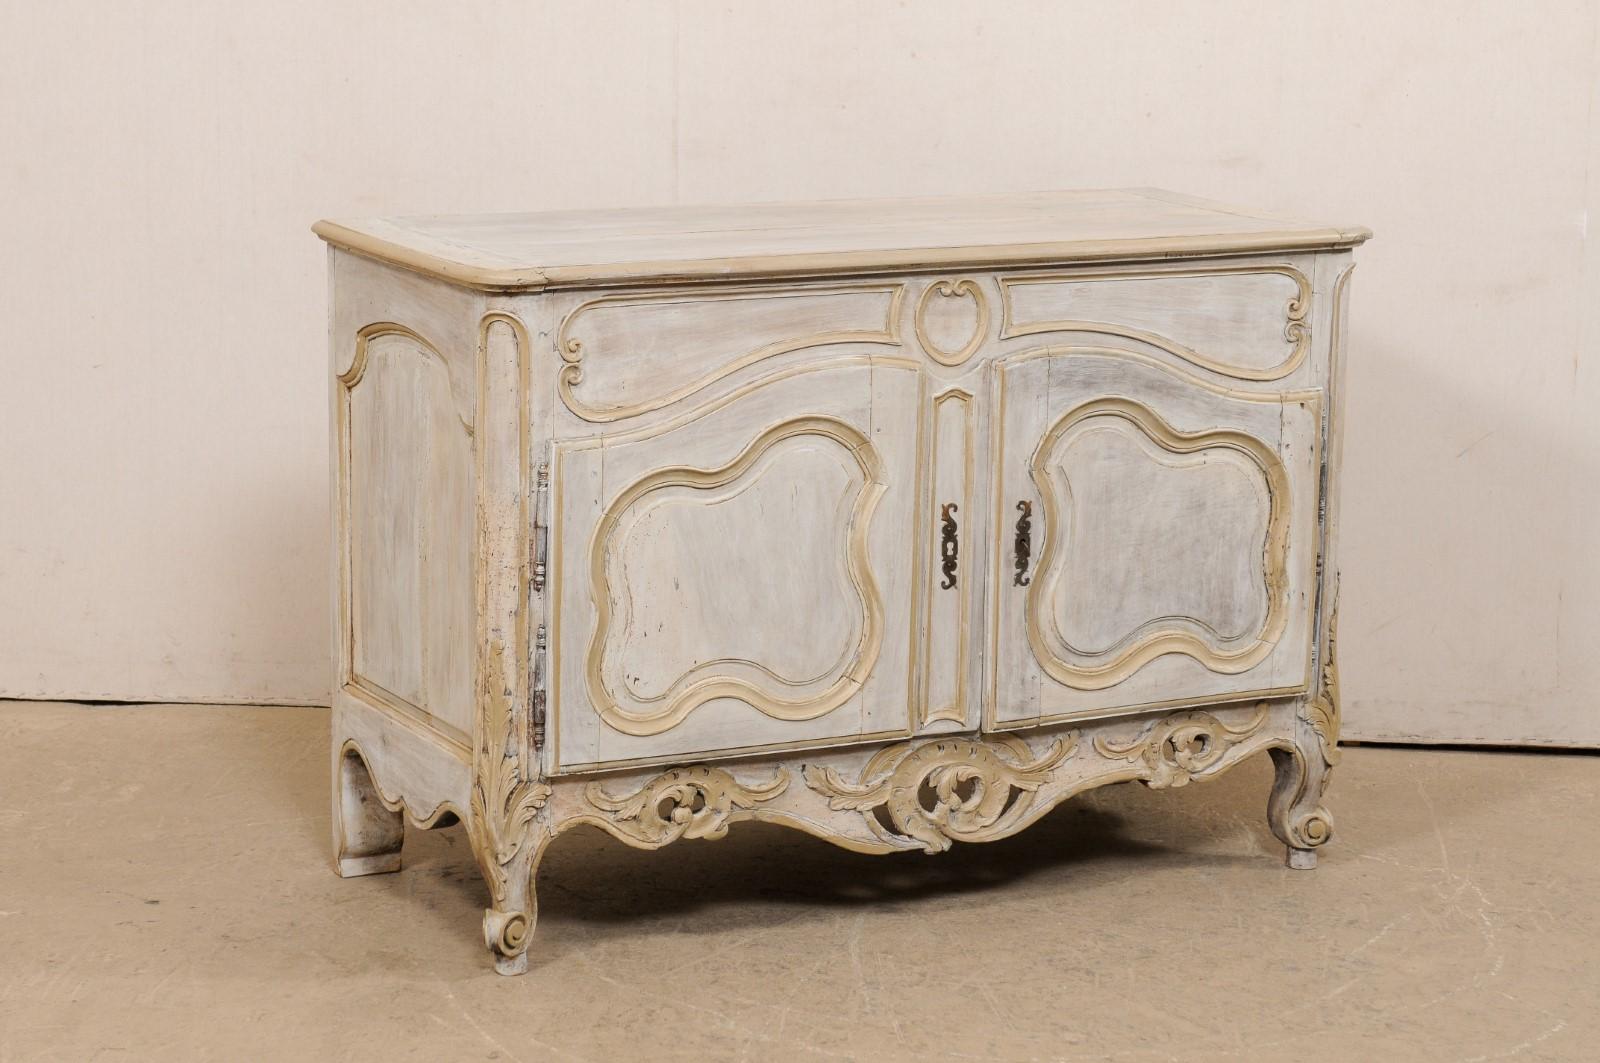 A French two-door buffet cabinet with nicely carved skirt from the early 19th century (or possibly earlier). This antique painted and carved wood cabinet from France has a rectangular-shaped top with rounded front corner edges, which rests above a